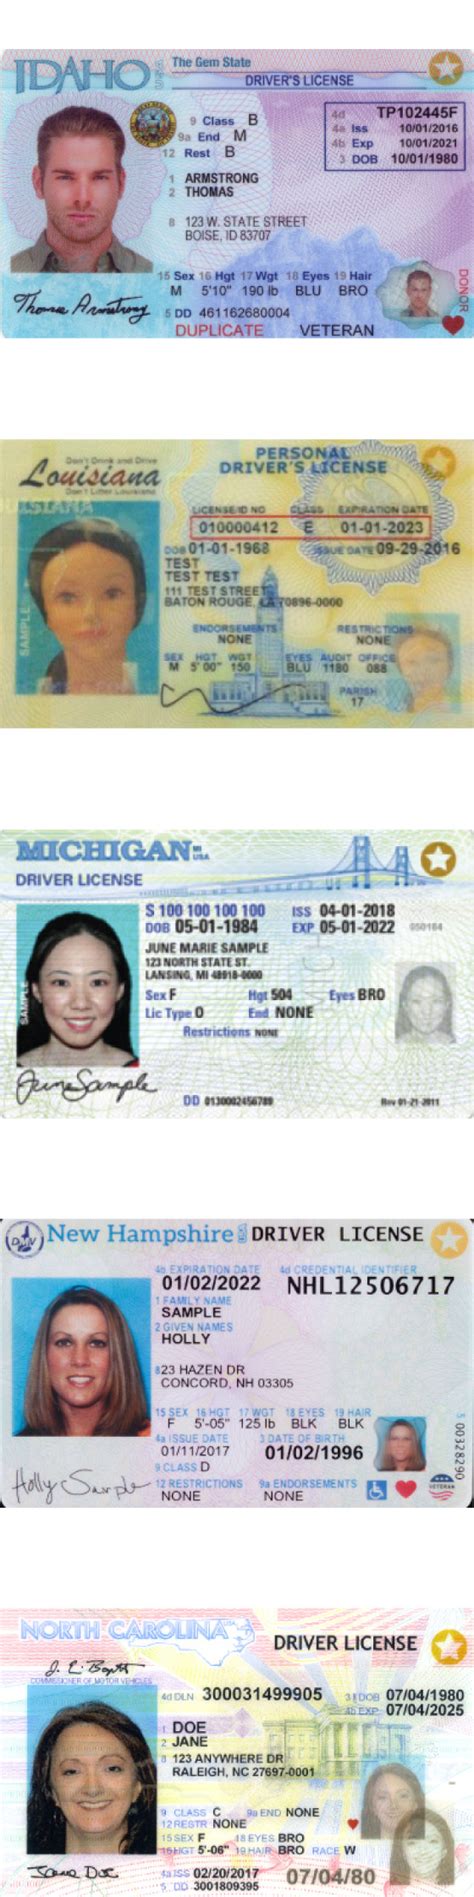 Louisiana Real Drivers License Requirements